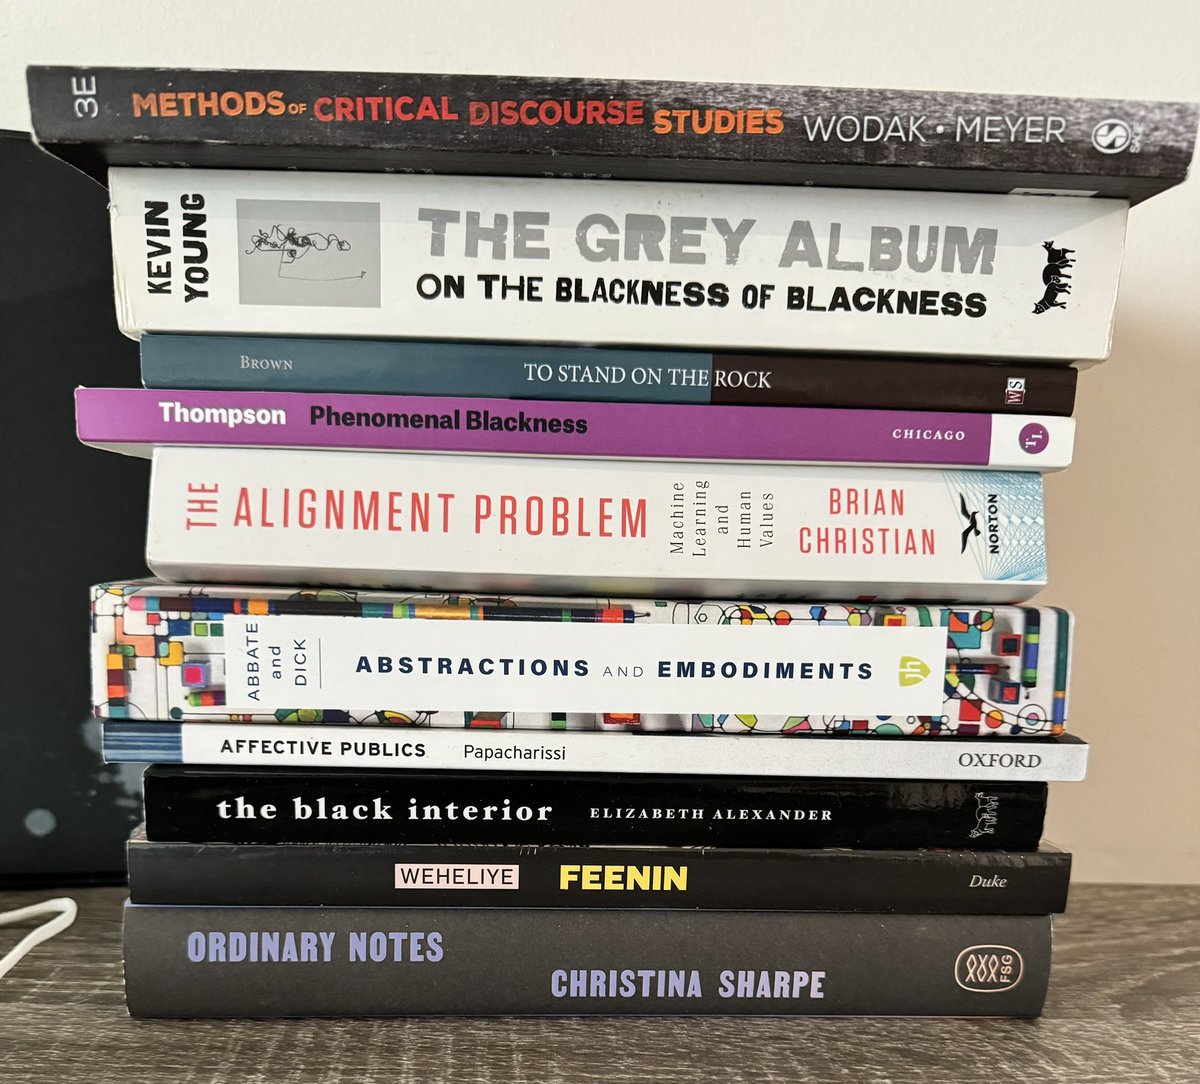 This is my January/February reading list. Anybody interested in doing a virtual reading group? I’d post the PDFs* to Perusall for group annotation and then we’d discuss weekly @Kaerf1 @rianna_walcott *yes the PDFs are bootlegged. But if you have the scratch you should buy…